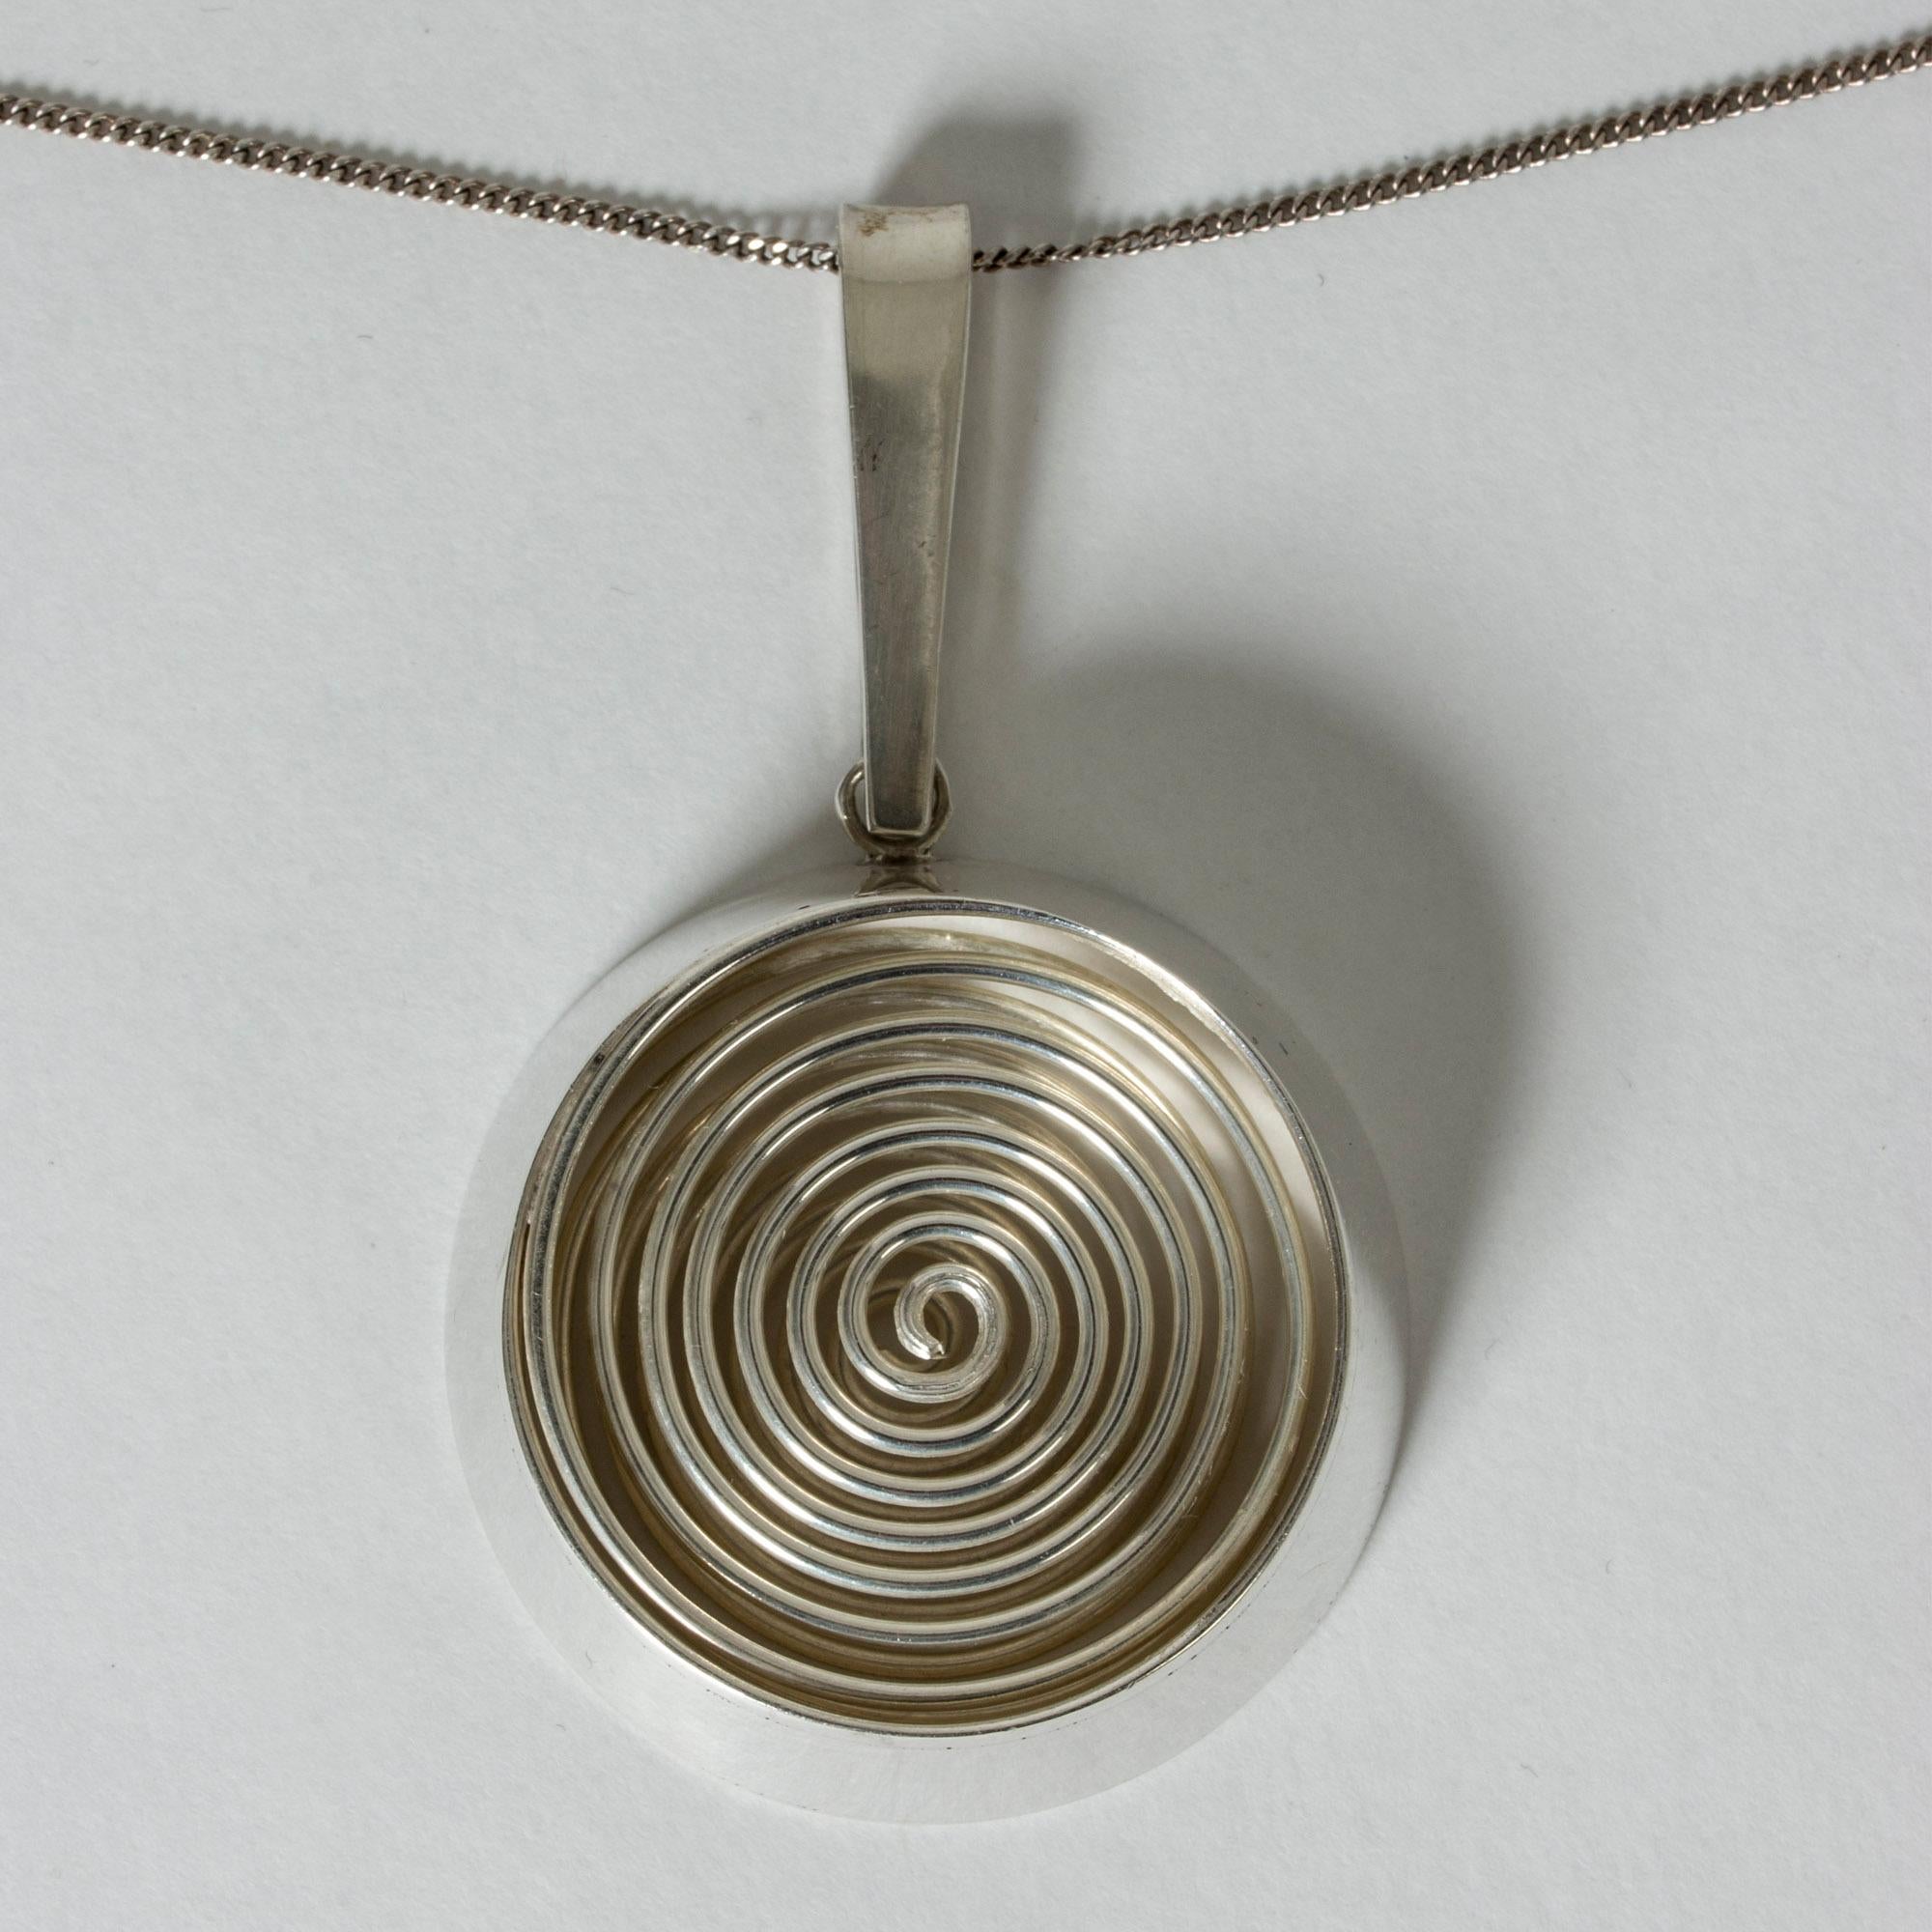 Striking silver pendant from Kaplans, with a springy spiral inside. Hypnotic design with great execution.